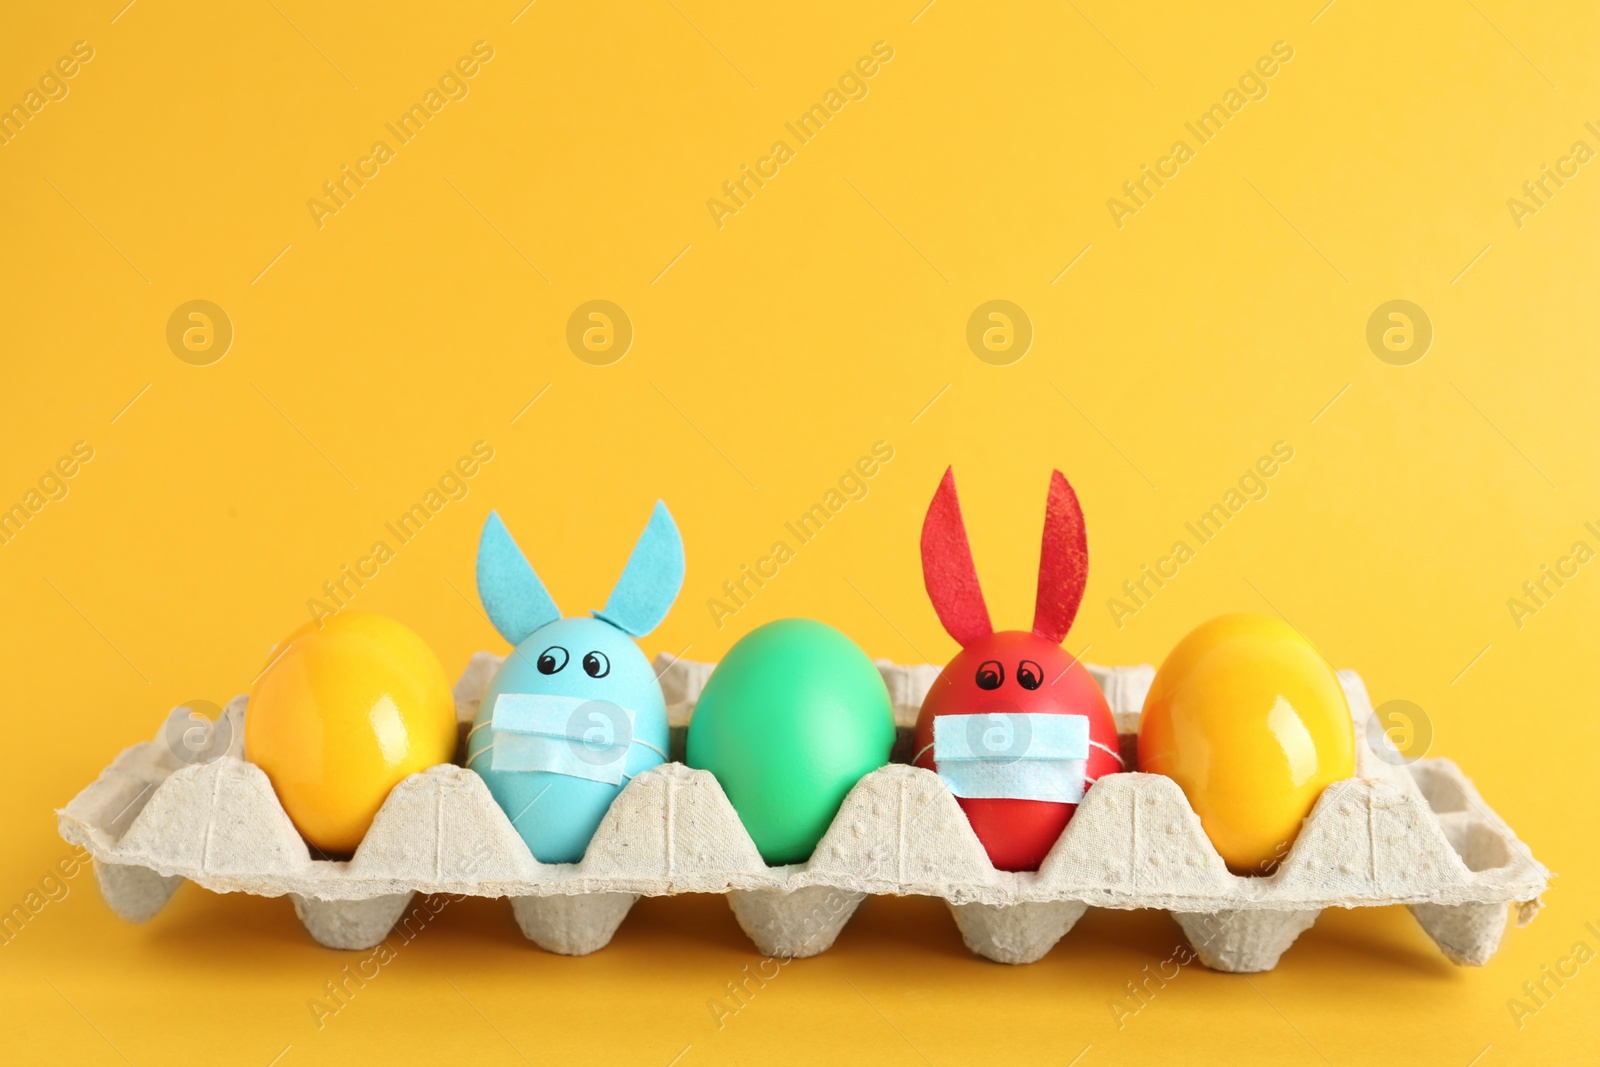 Photo of Painted eggs decorated with bunny ears and protective masks in package on yellow background. Easter holiday during COVID-19 quarantine